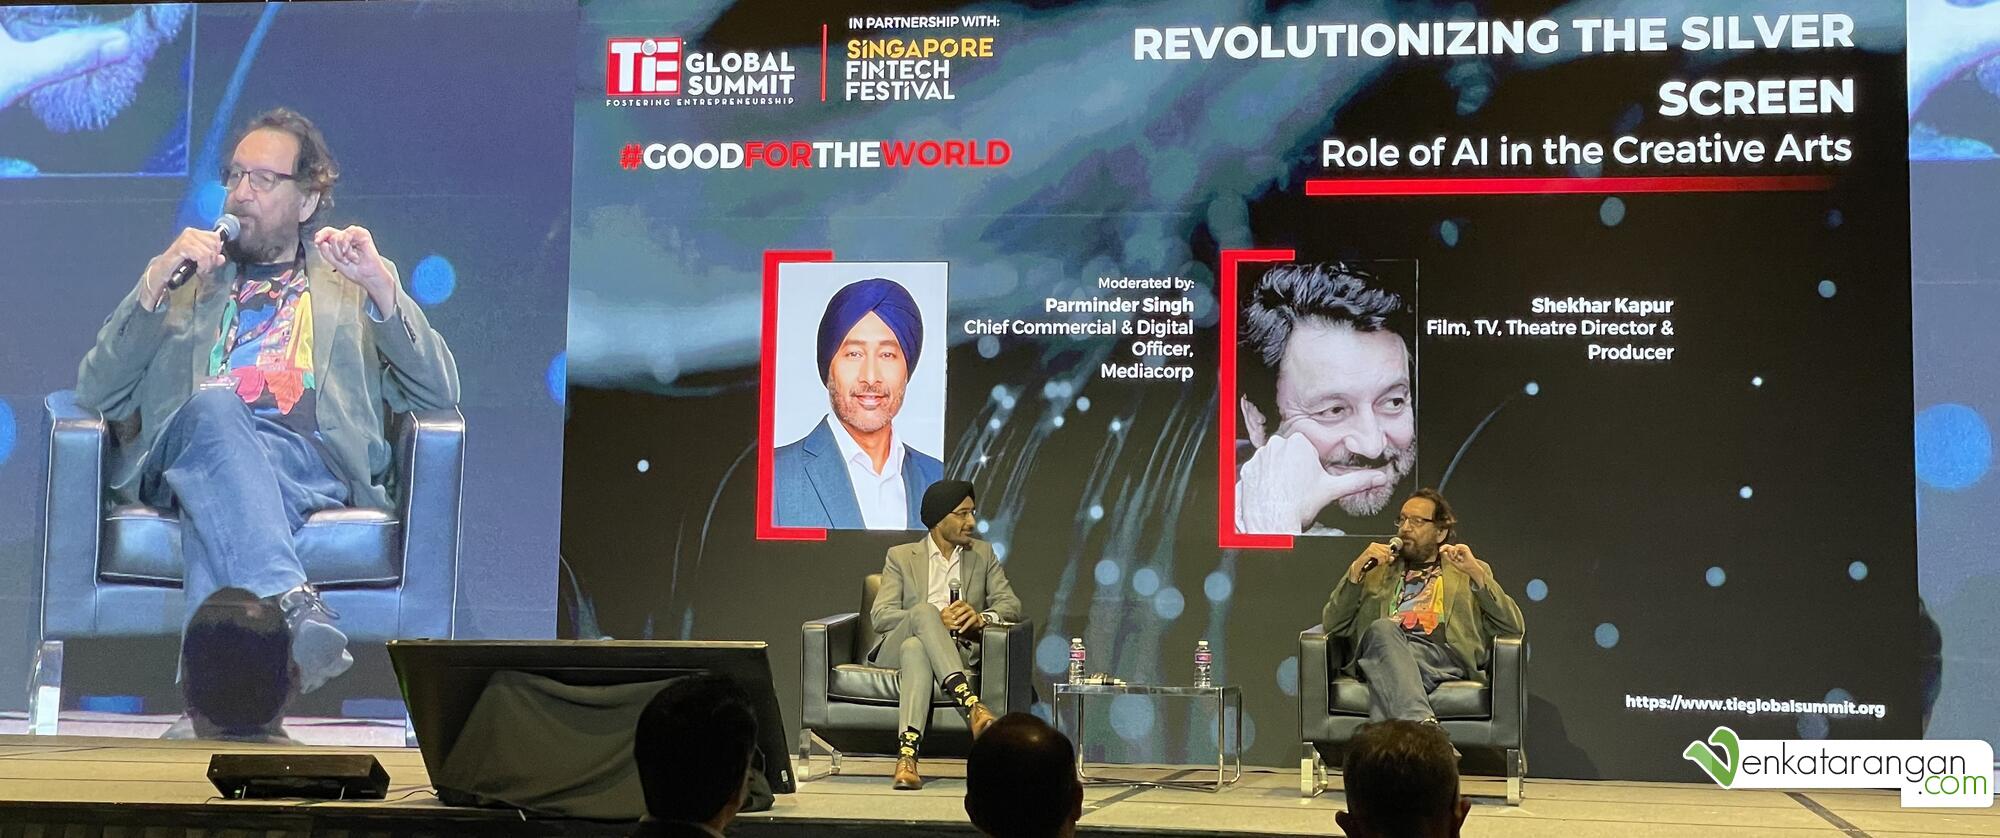 Revolutionizing the silver screen - Role of AI in the creative arts with Shekhar Kapur and Paraminder Singh of Mediacorp